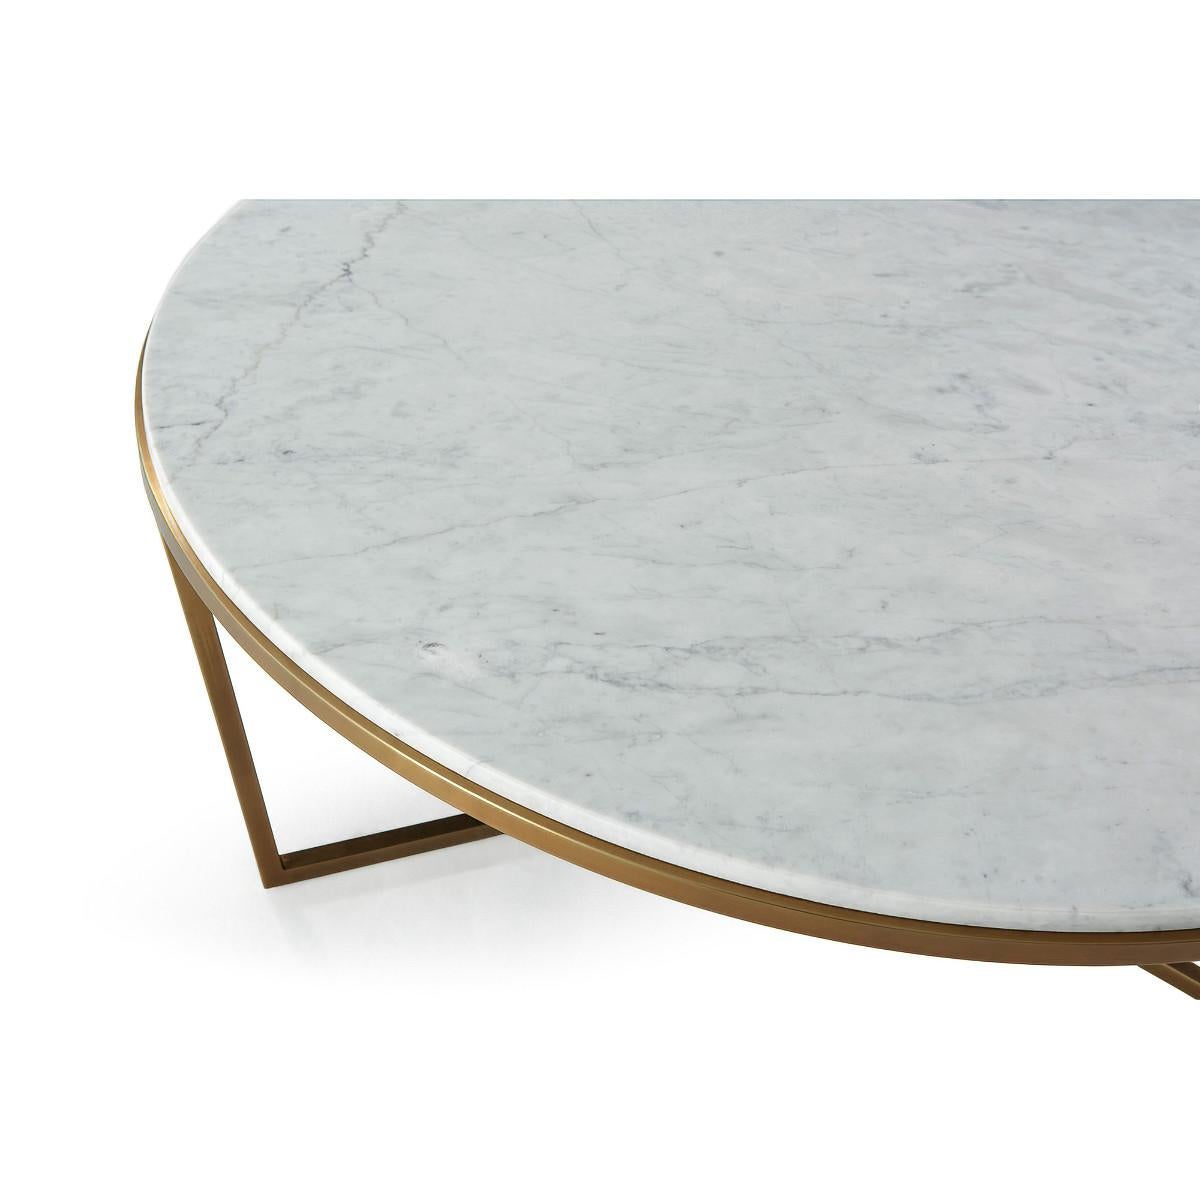 A modern marble top cocktail table with a stepped edge. The circular Bianco Carrara marble top sits on a brushed brass finish base. 

Dimensions: 47.25